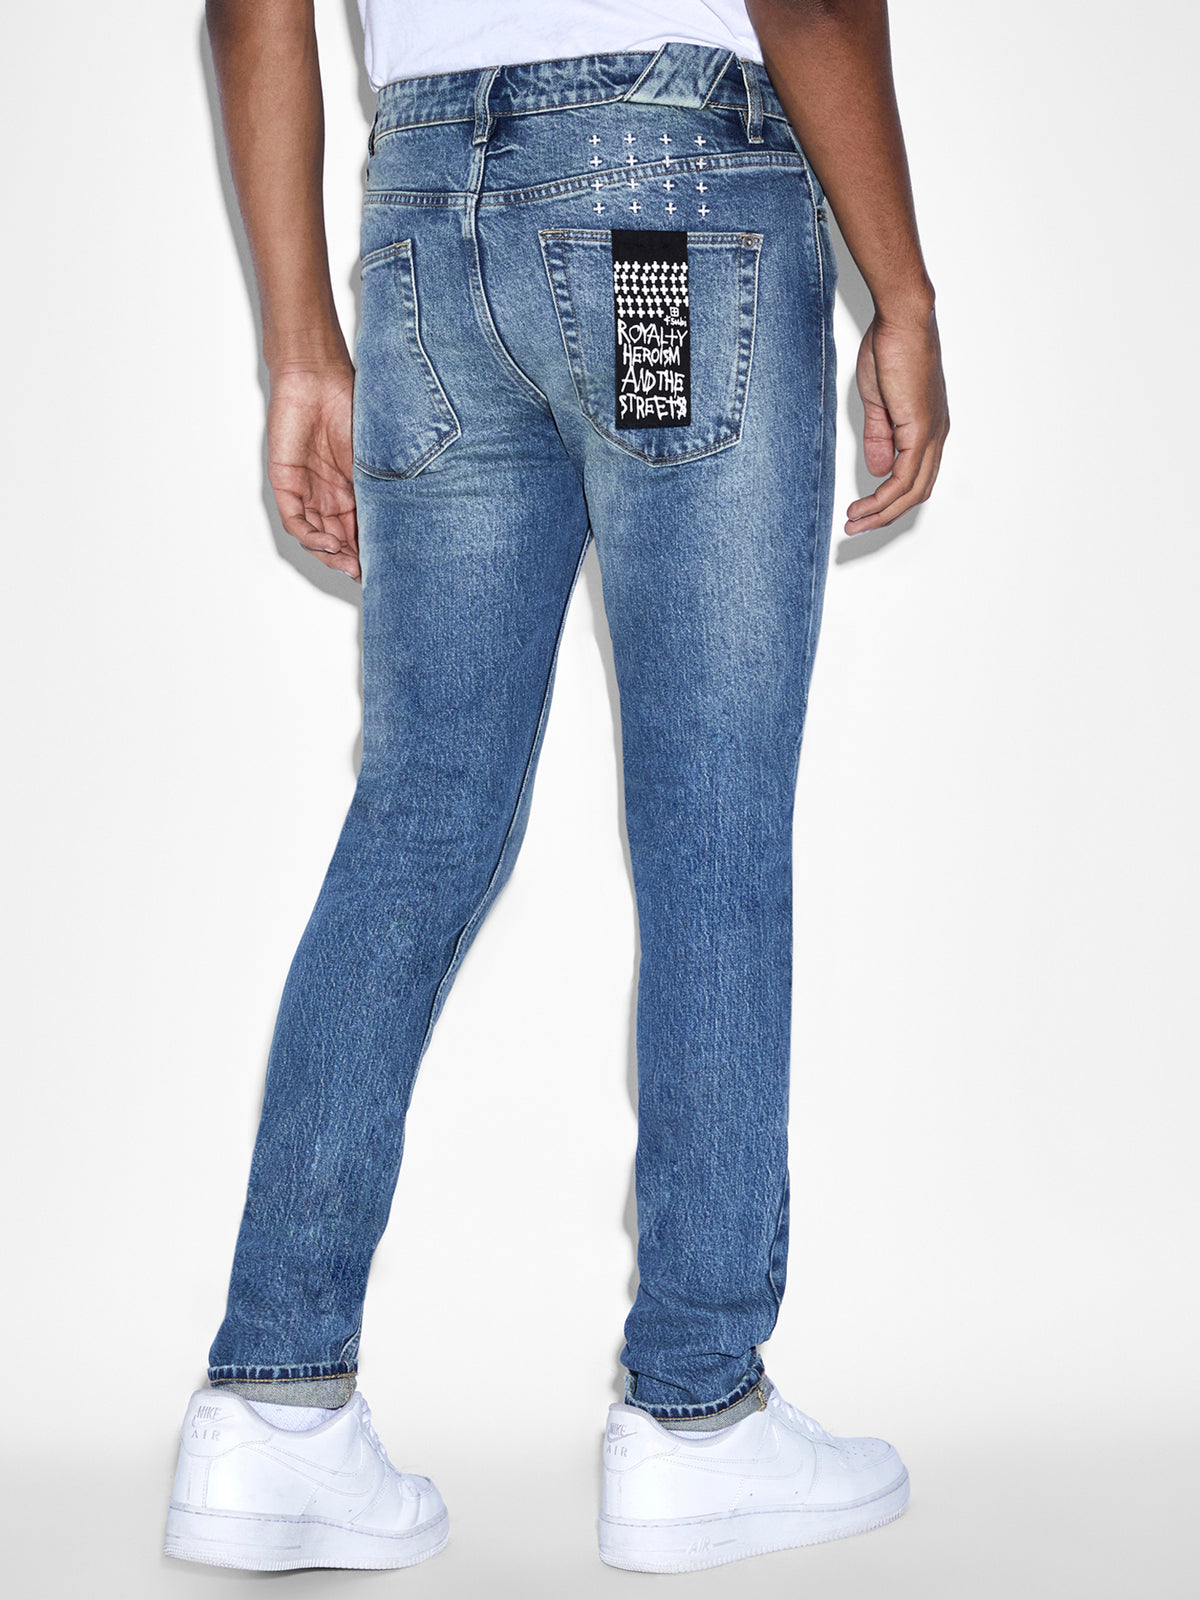 Chitch Slim Fit Jeans in Chronicle Blue